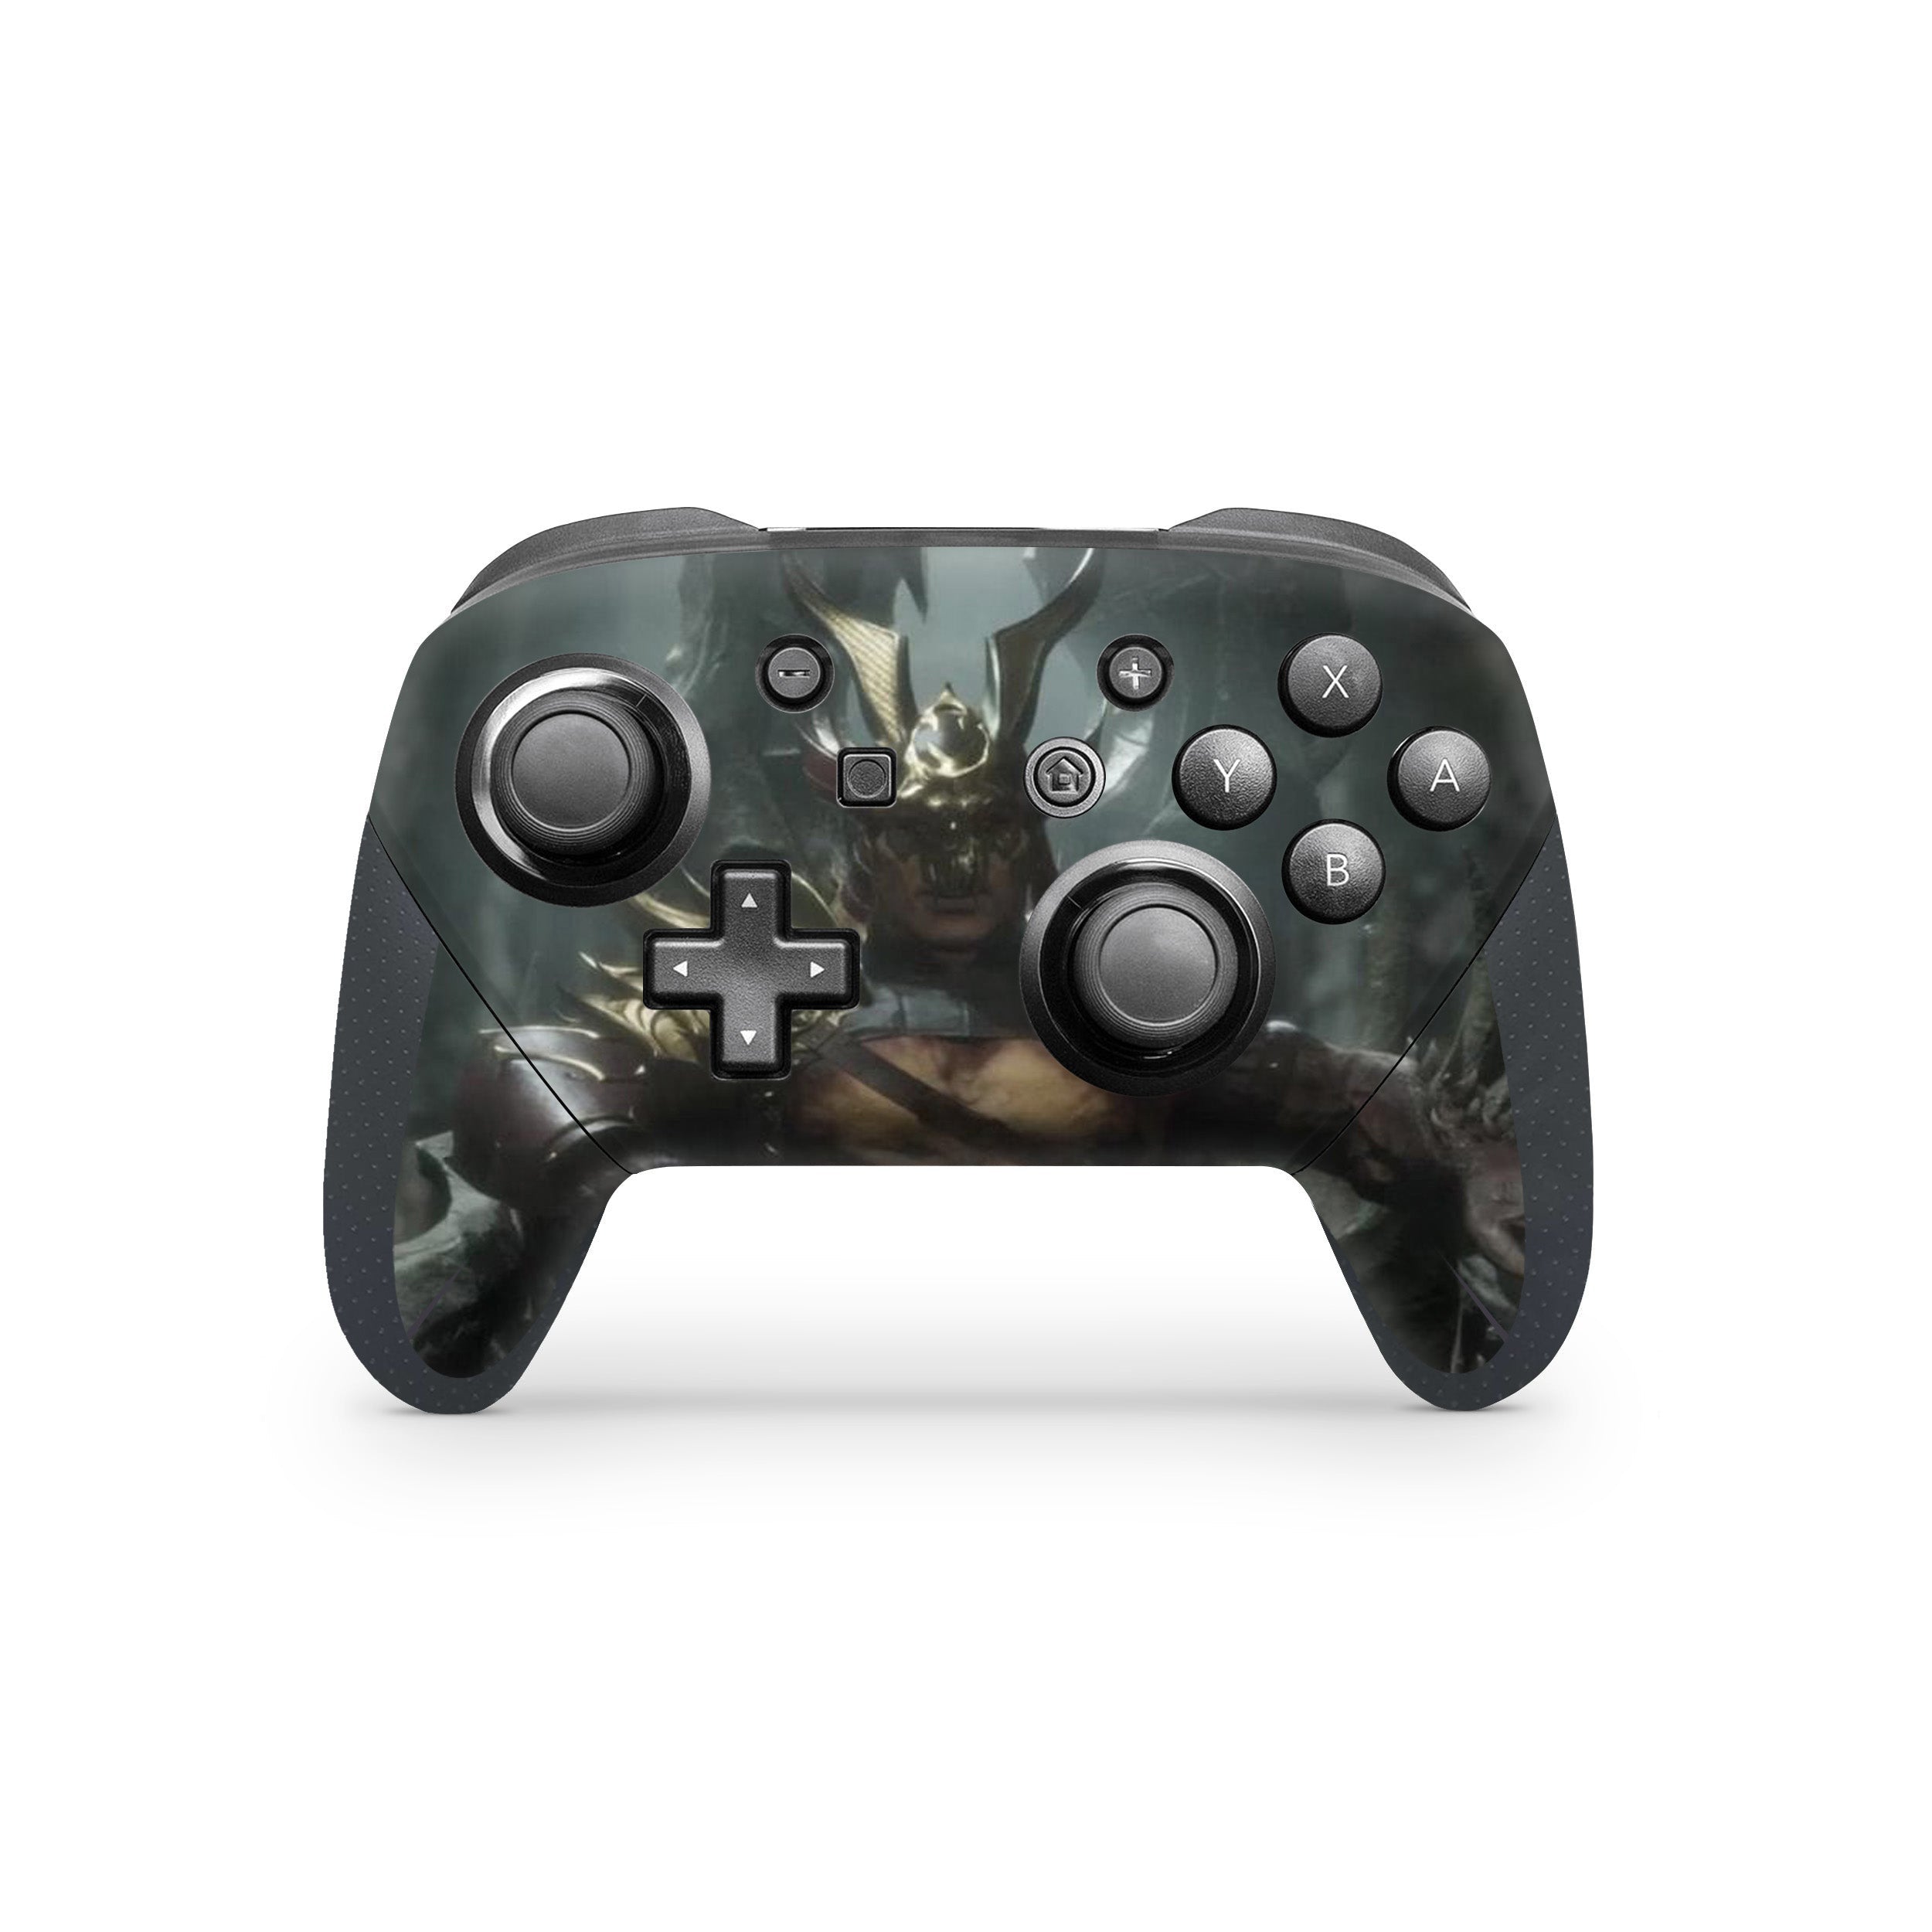 A video game skin featuring a Mortal Kombat 11 Scorpion design for the Switch Pro Controller.